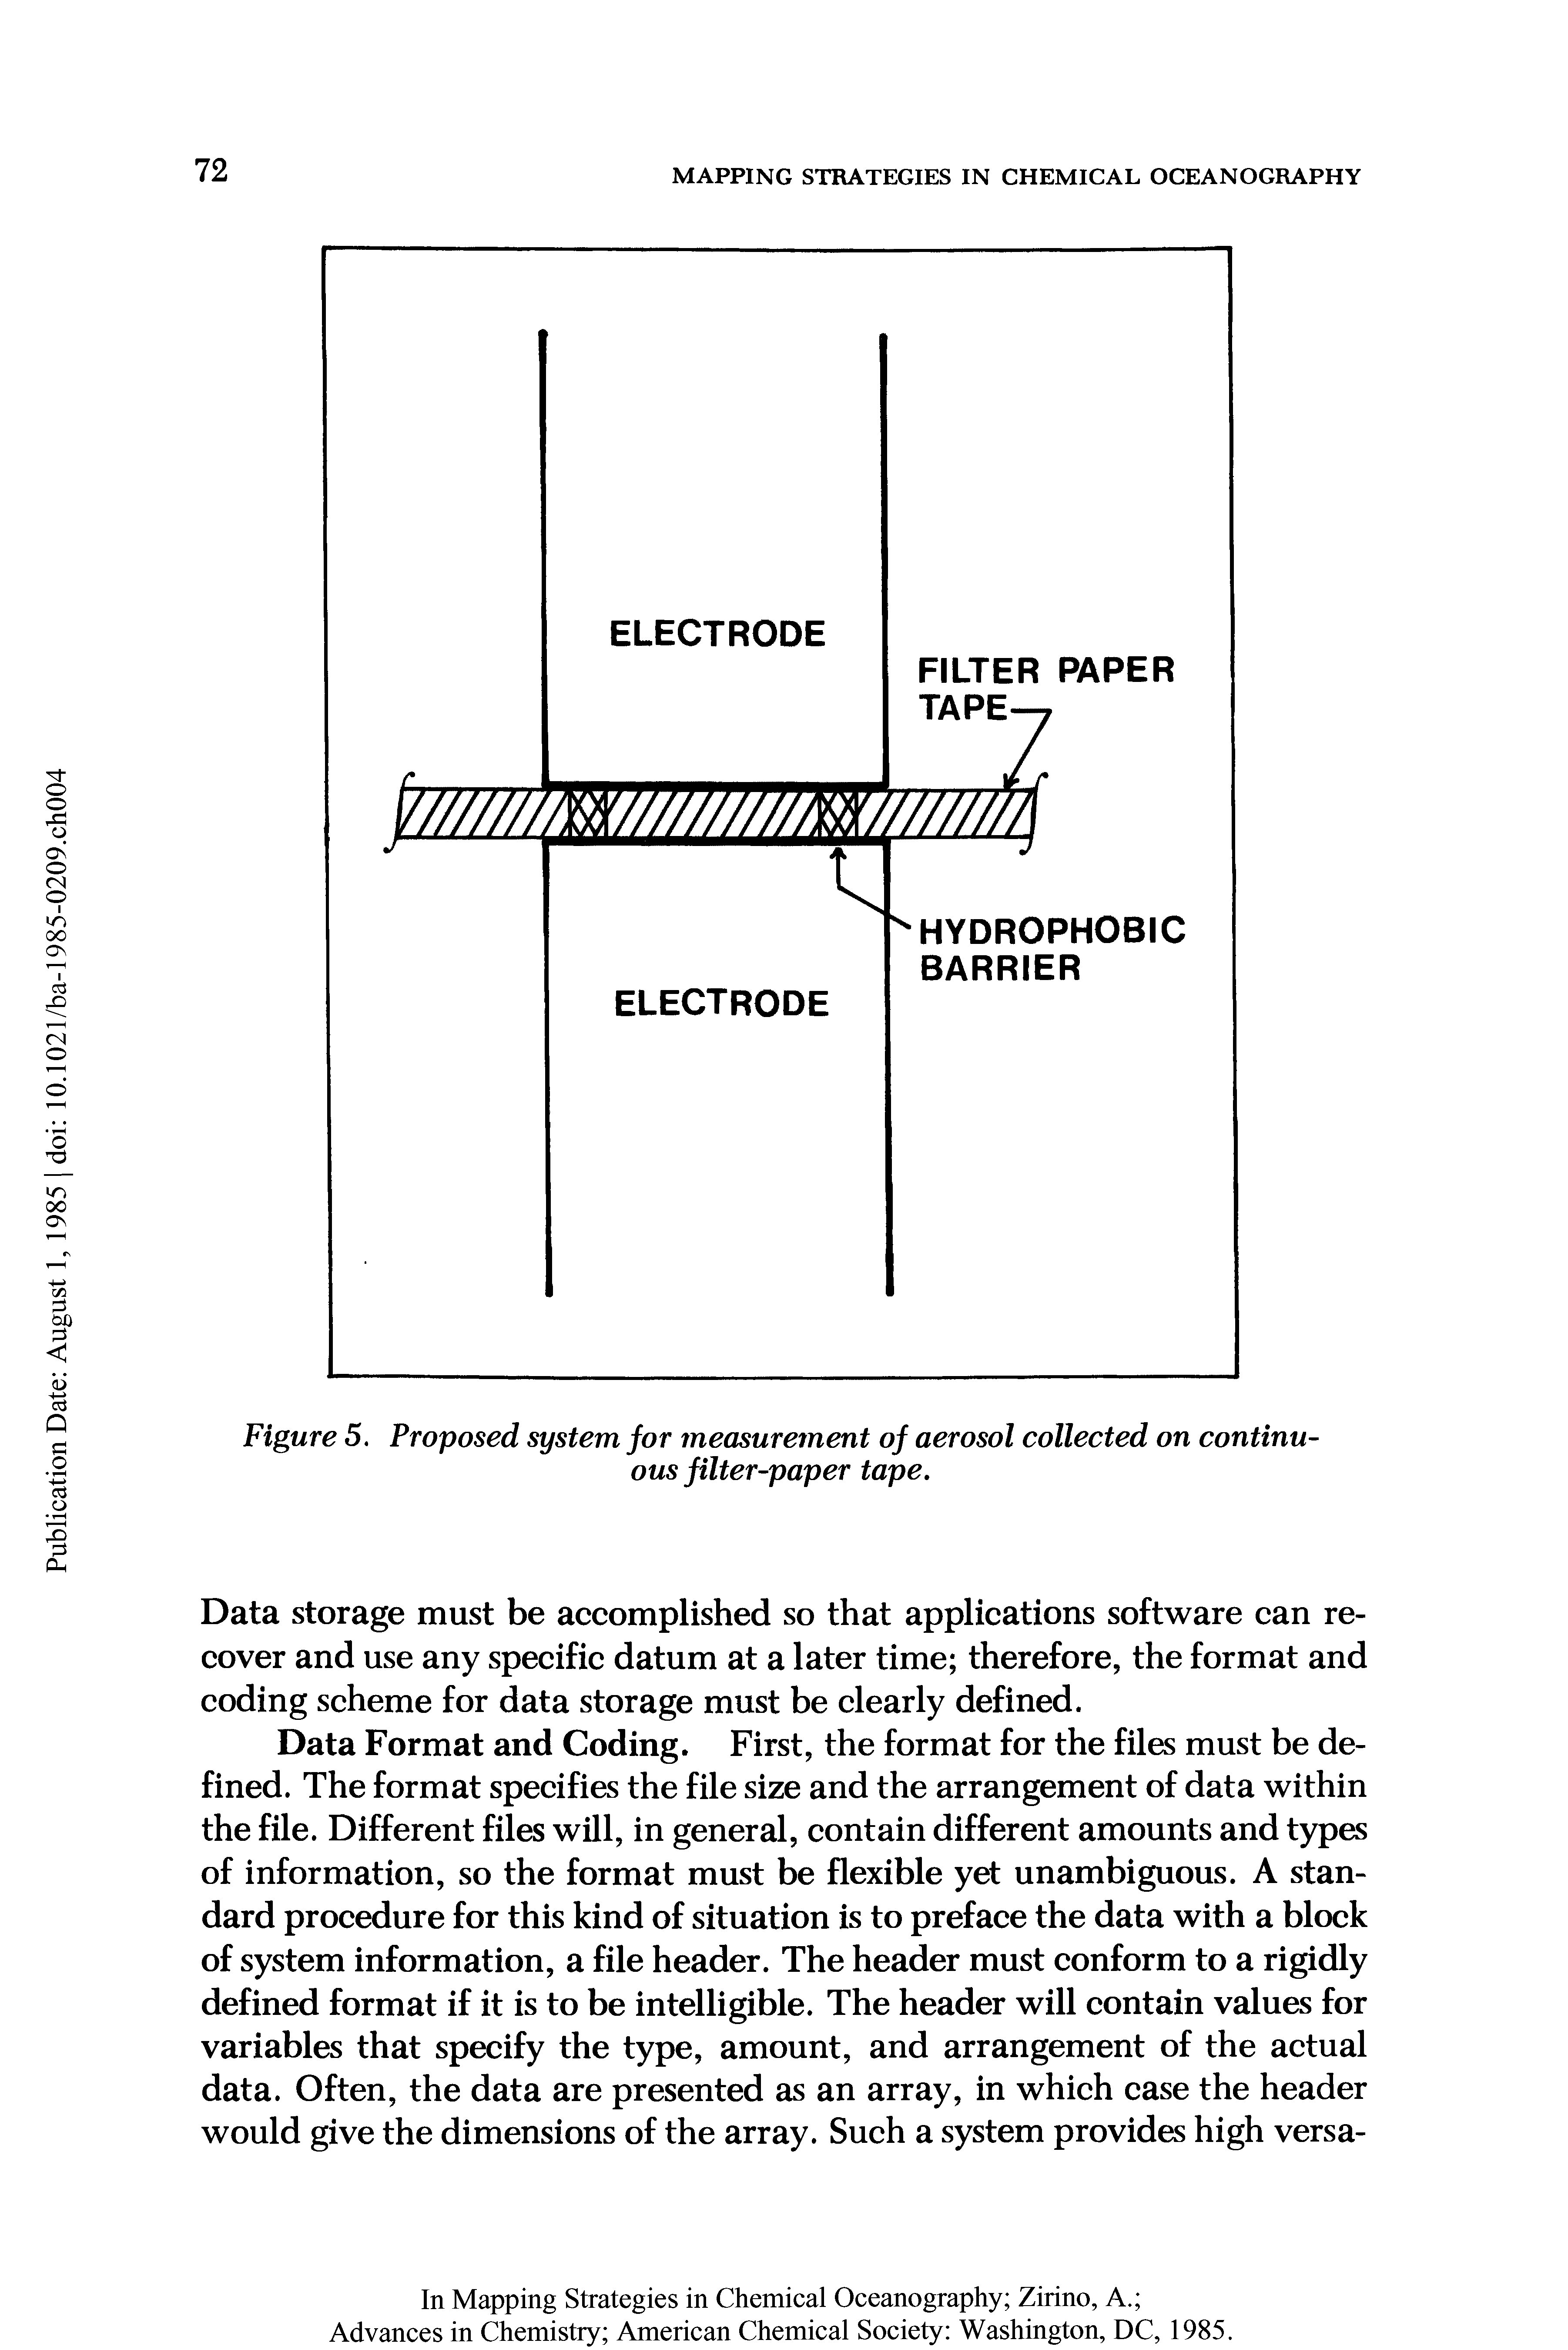 Figure 5. Proposed system for measurement of aerosol collected on continuous filter-paper tape.